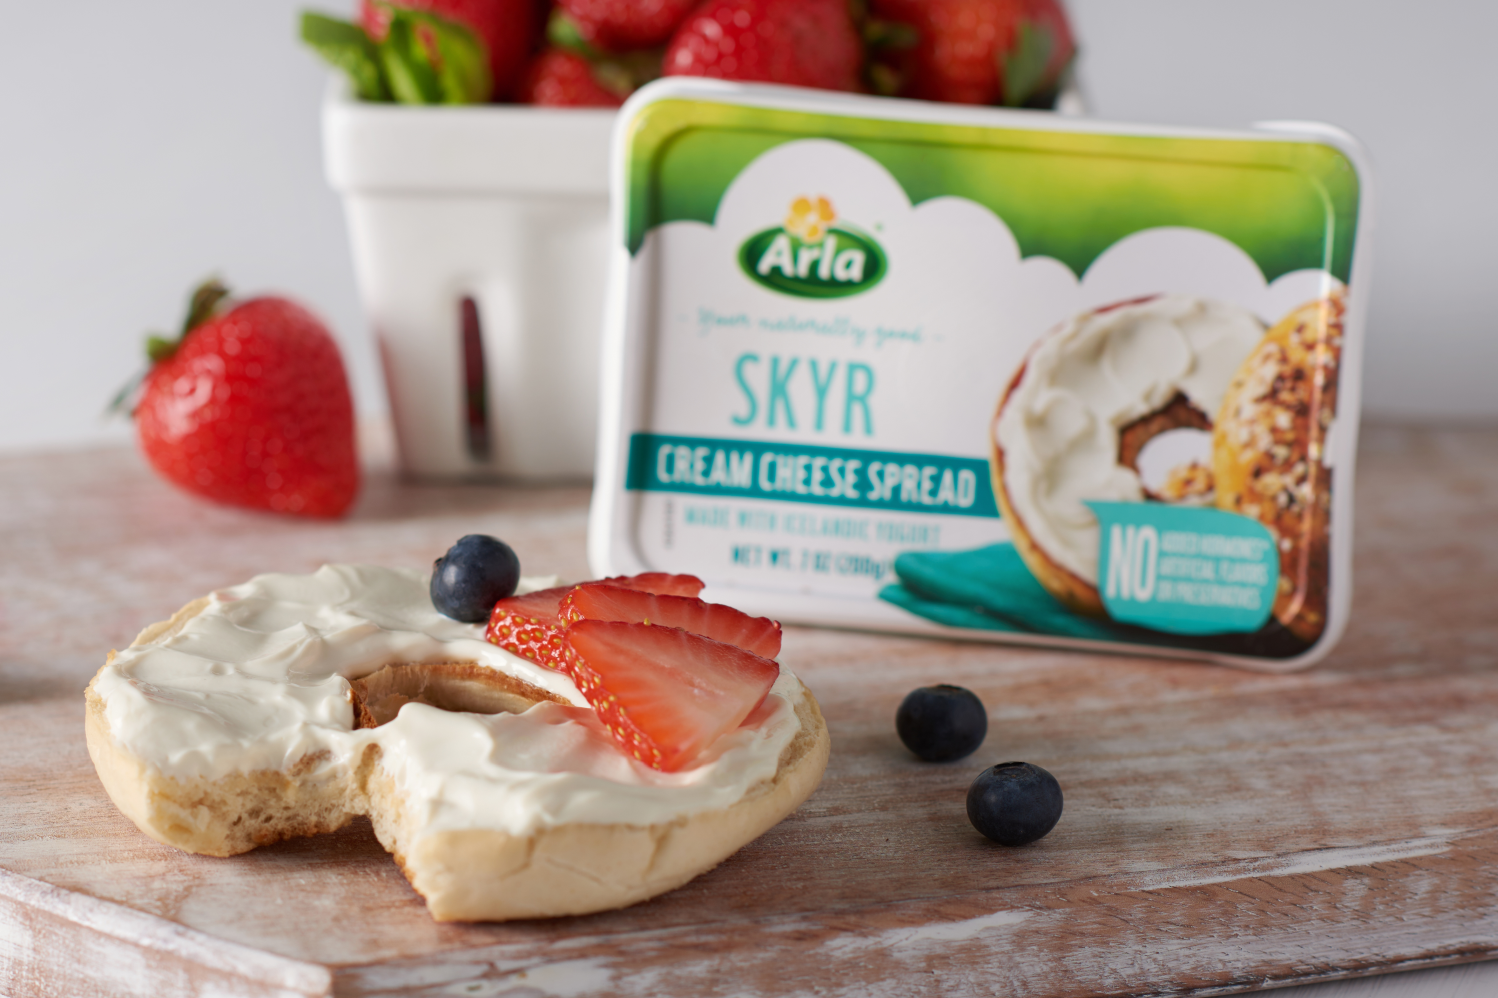 Arla introduces skyr cream cheese line: 'We're trying to get in early on  that adoption